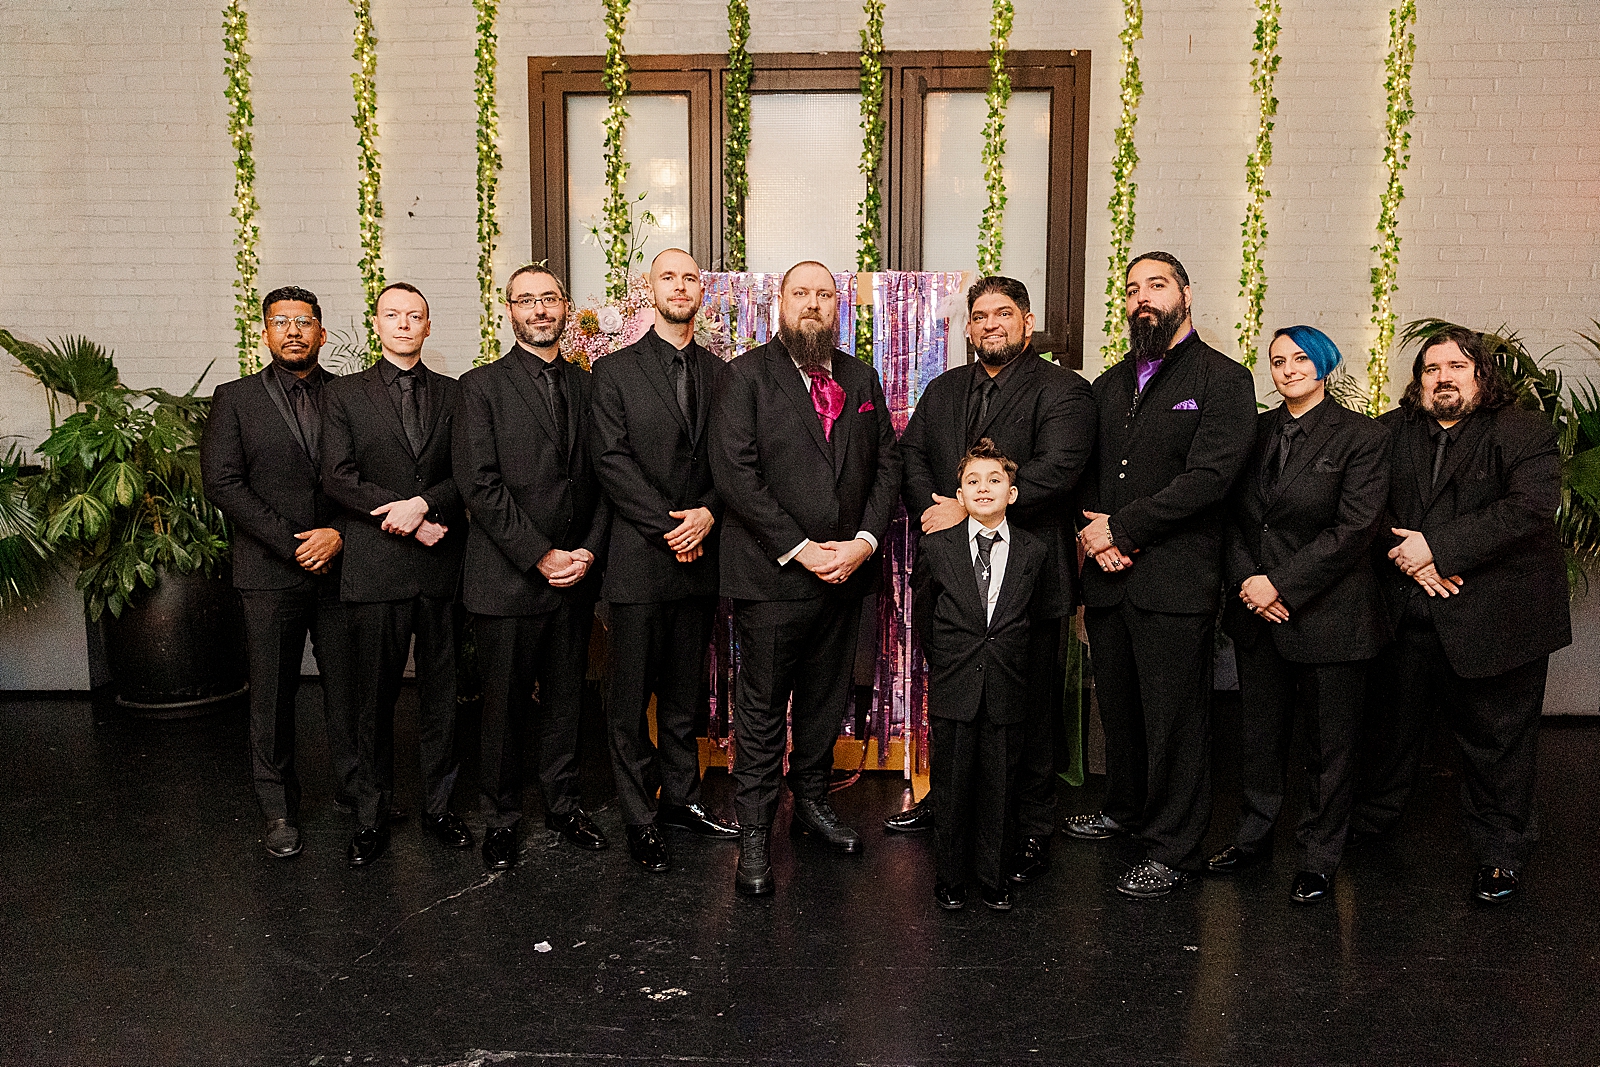 Shot of the groom, his groomsmen, and the ring bearer posing in front of the hexagon shaped ceremony arch.